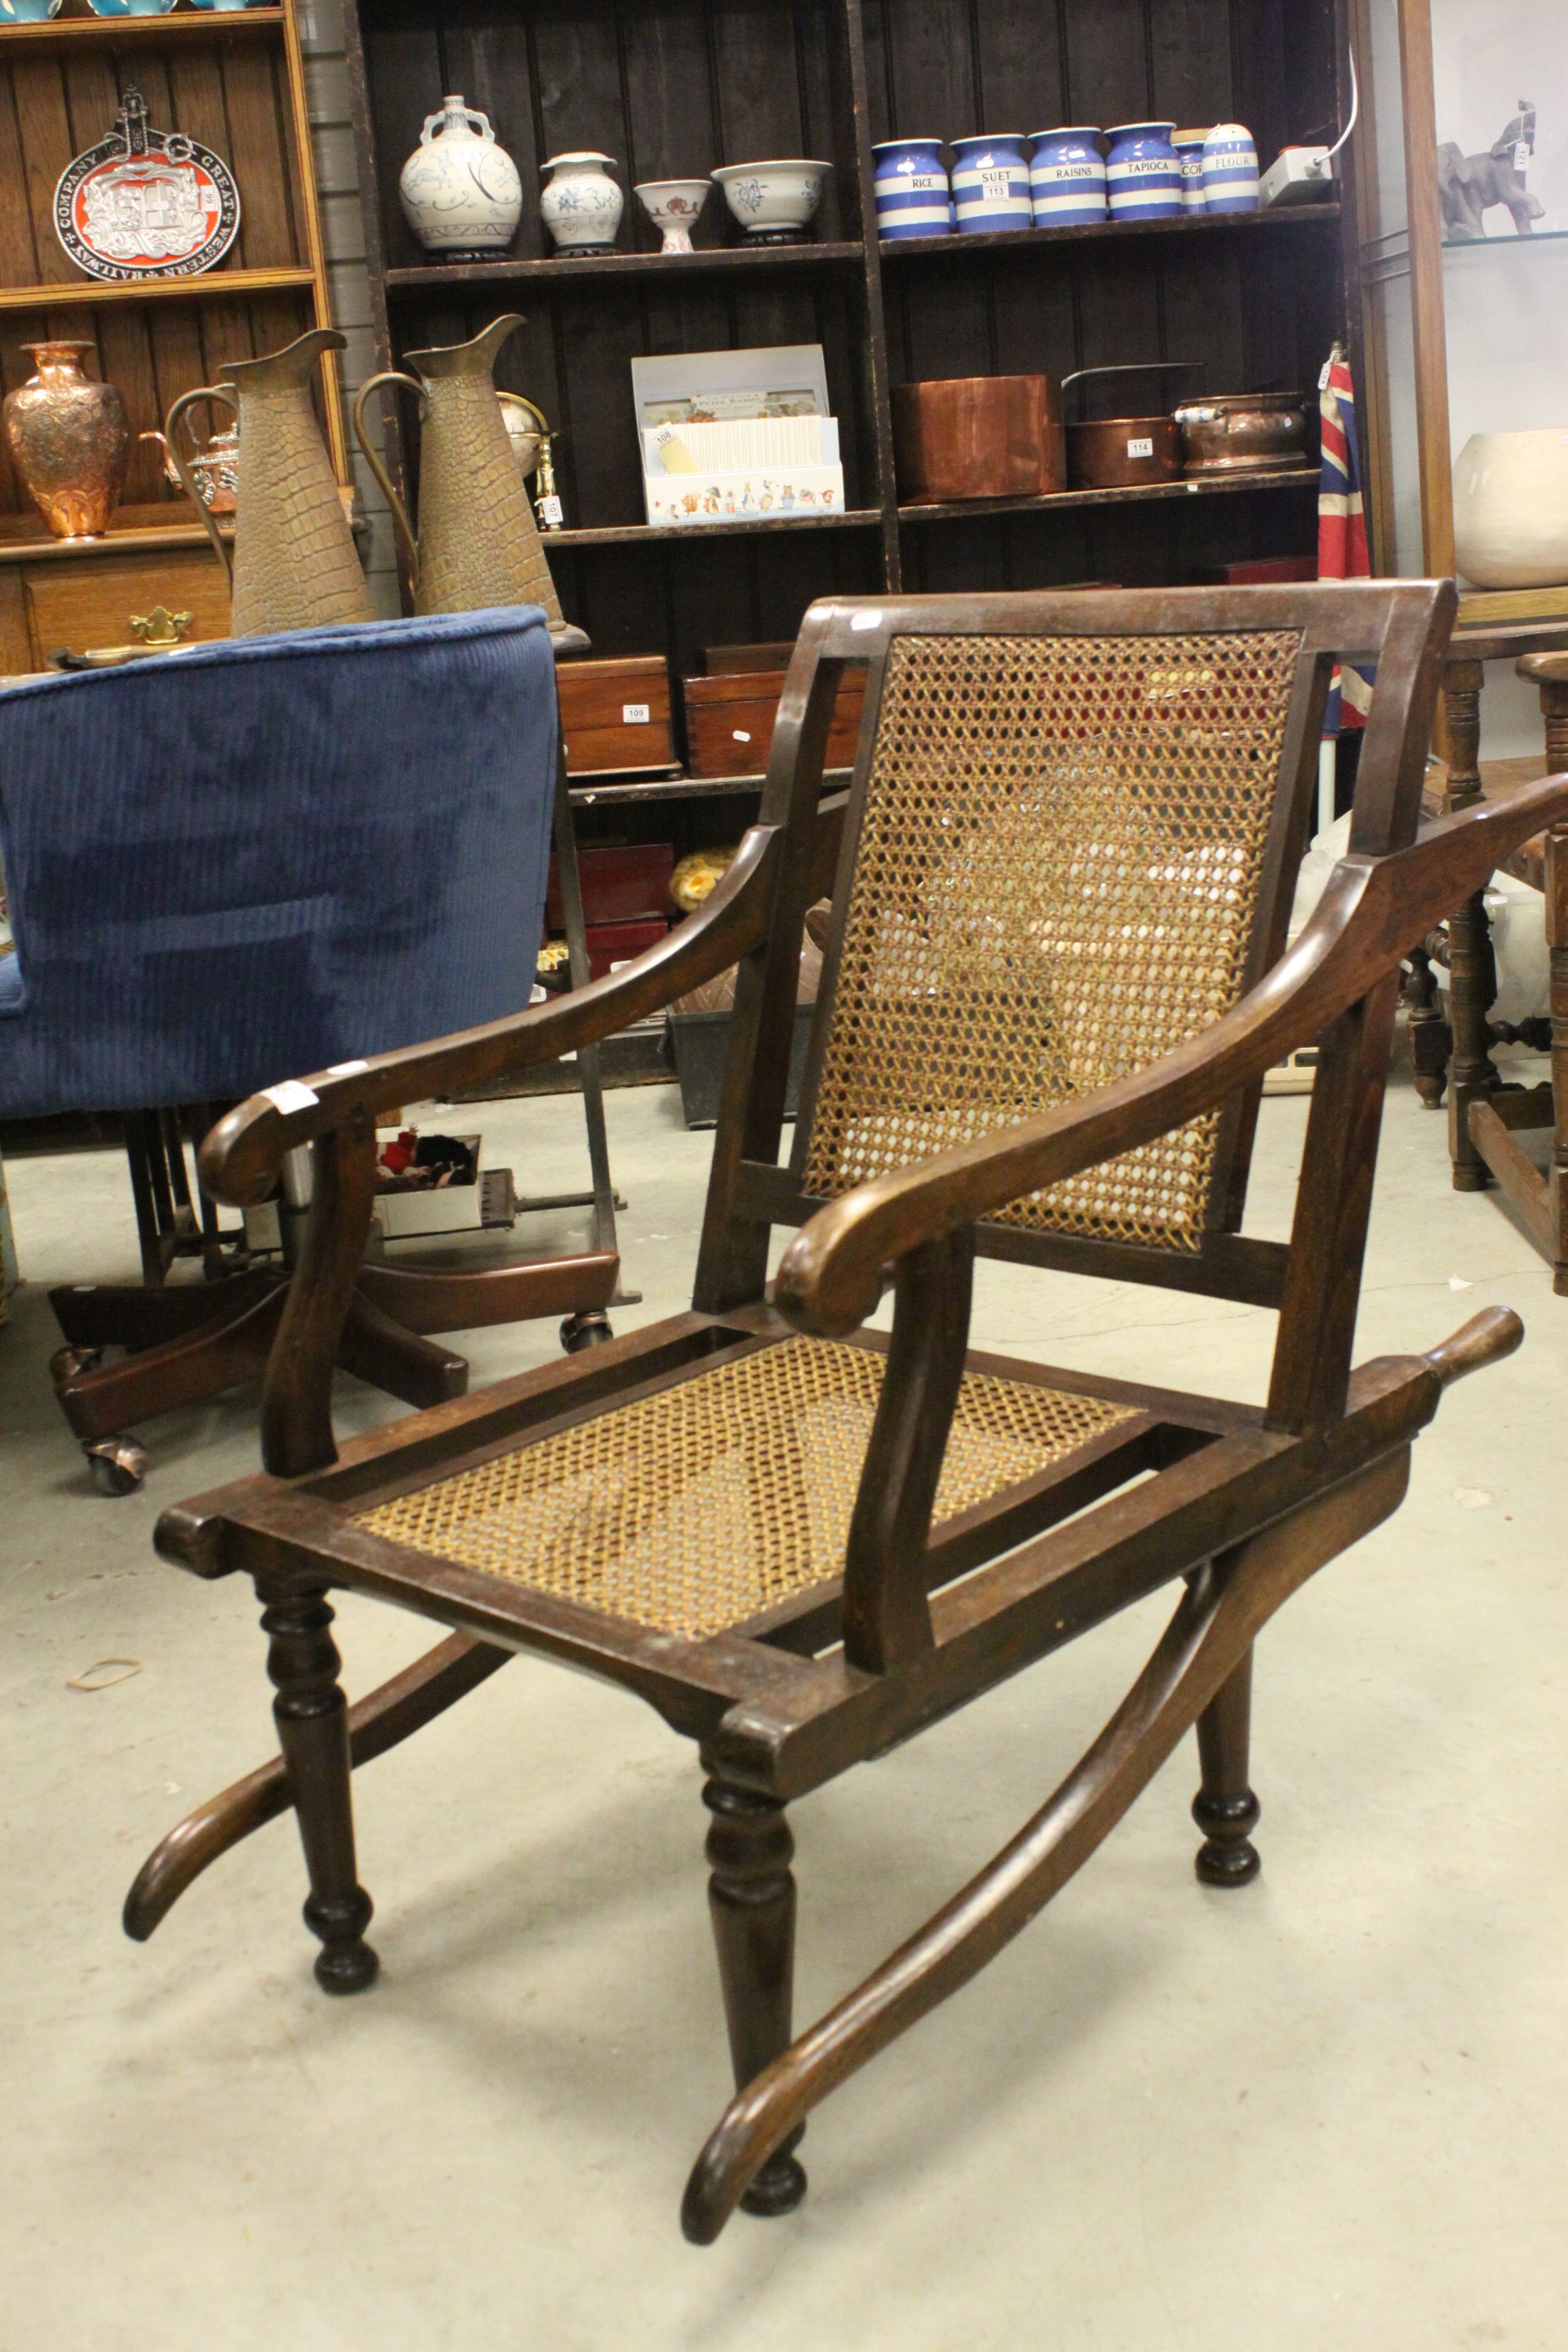 19th century Carter style invalid chair with bergere back and seat